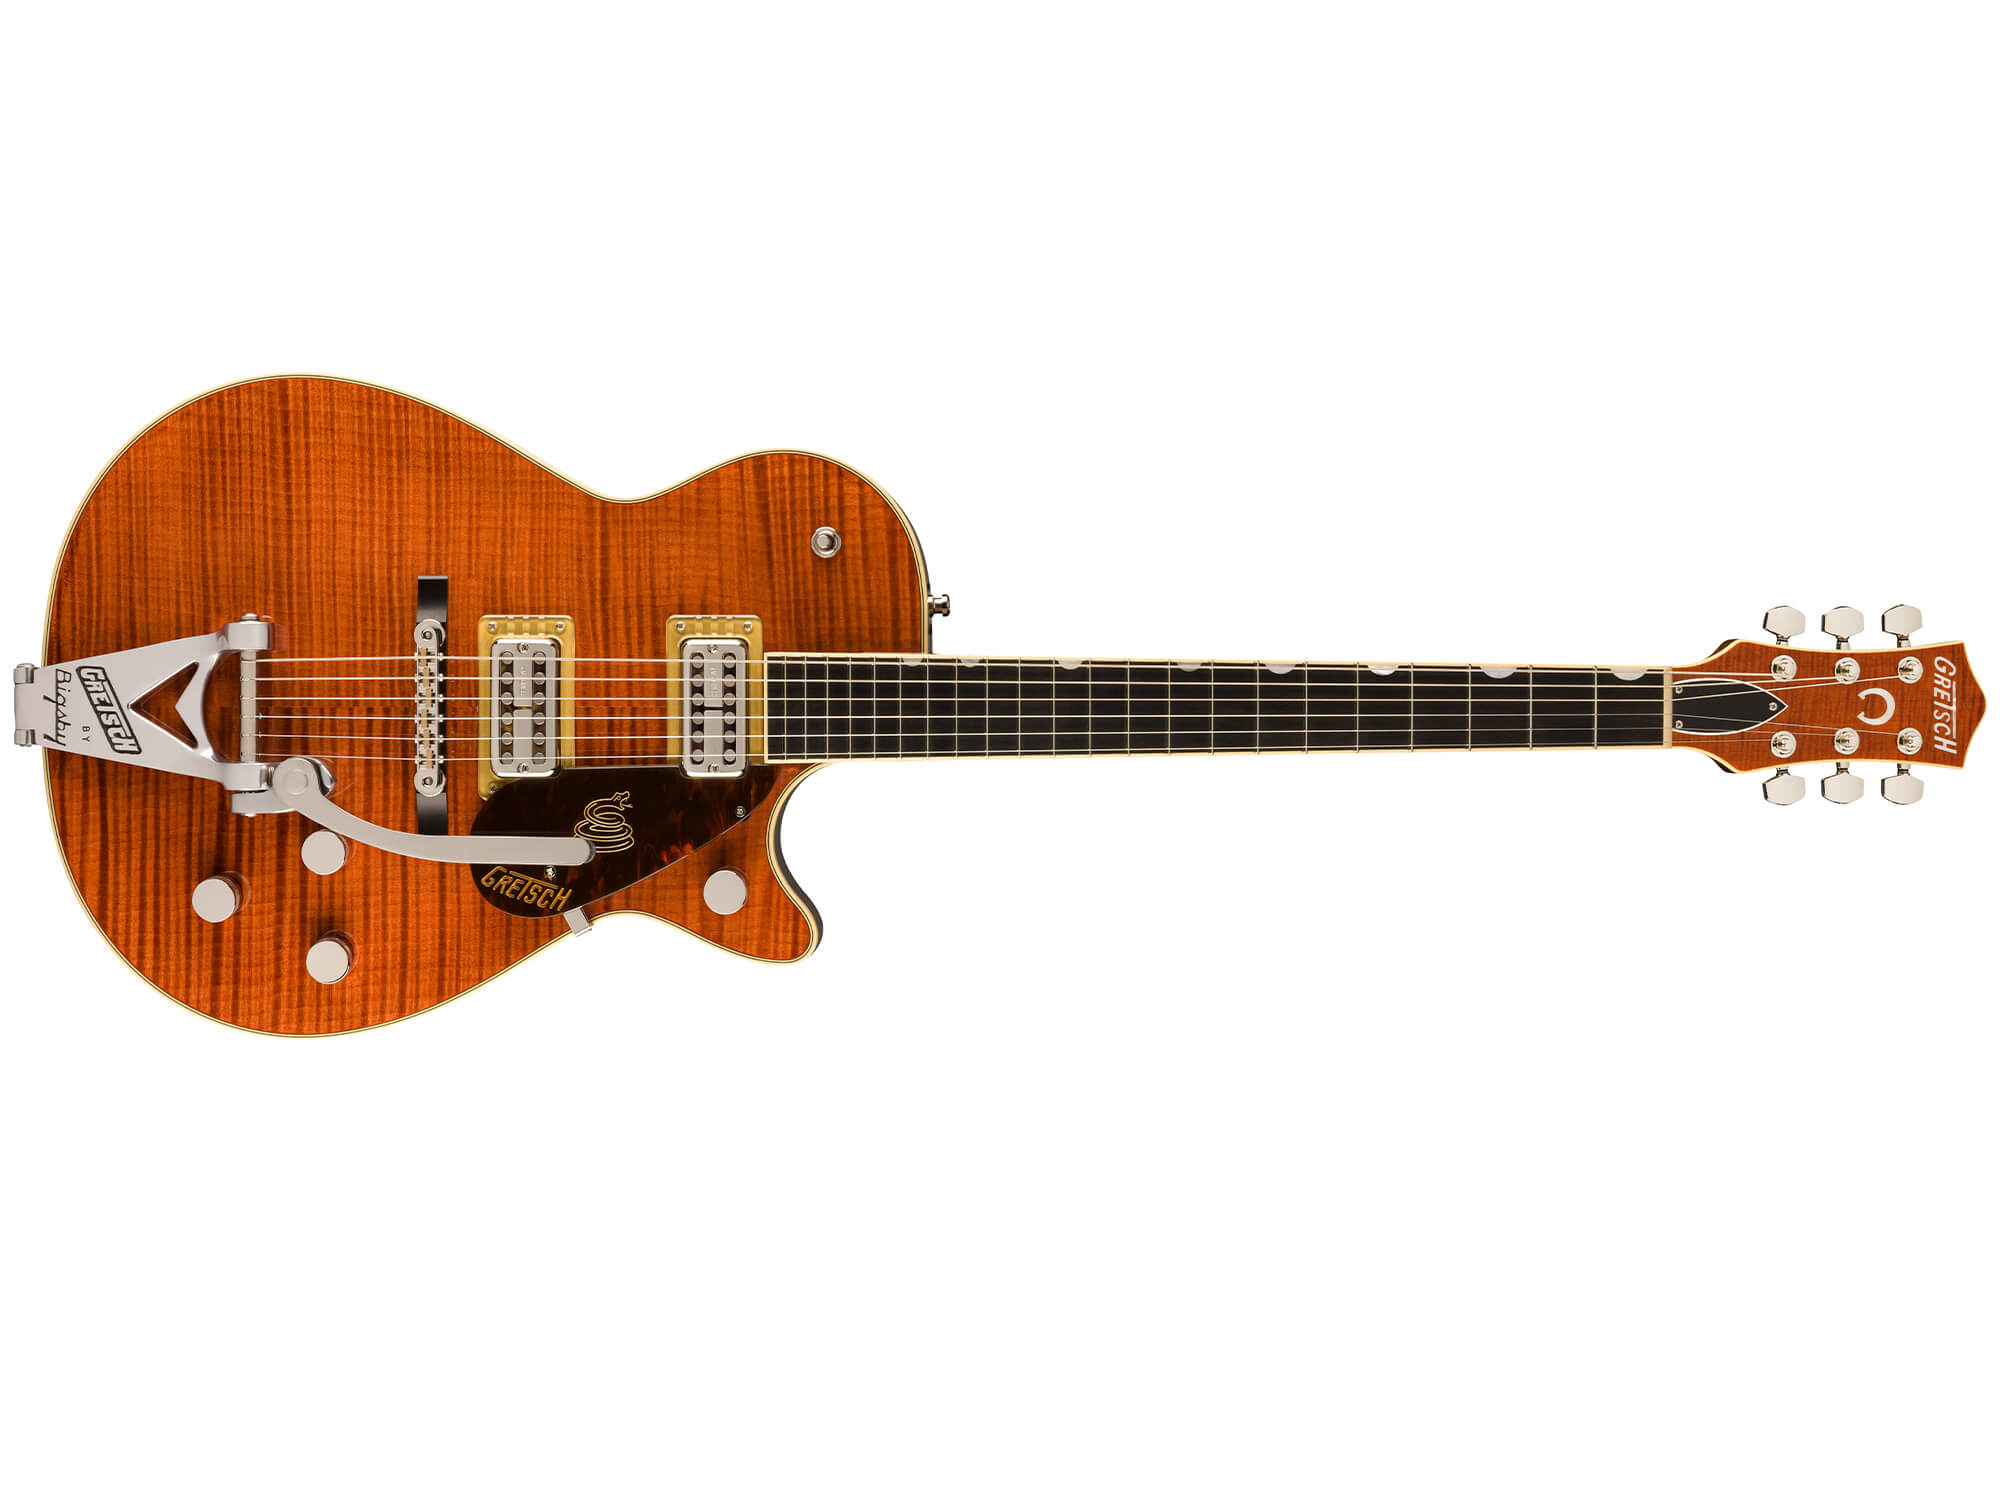 Gretsch Limited Edition Professional Collection Bourbon Sidewinder